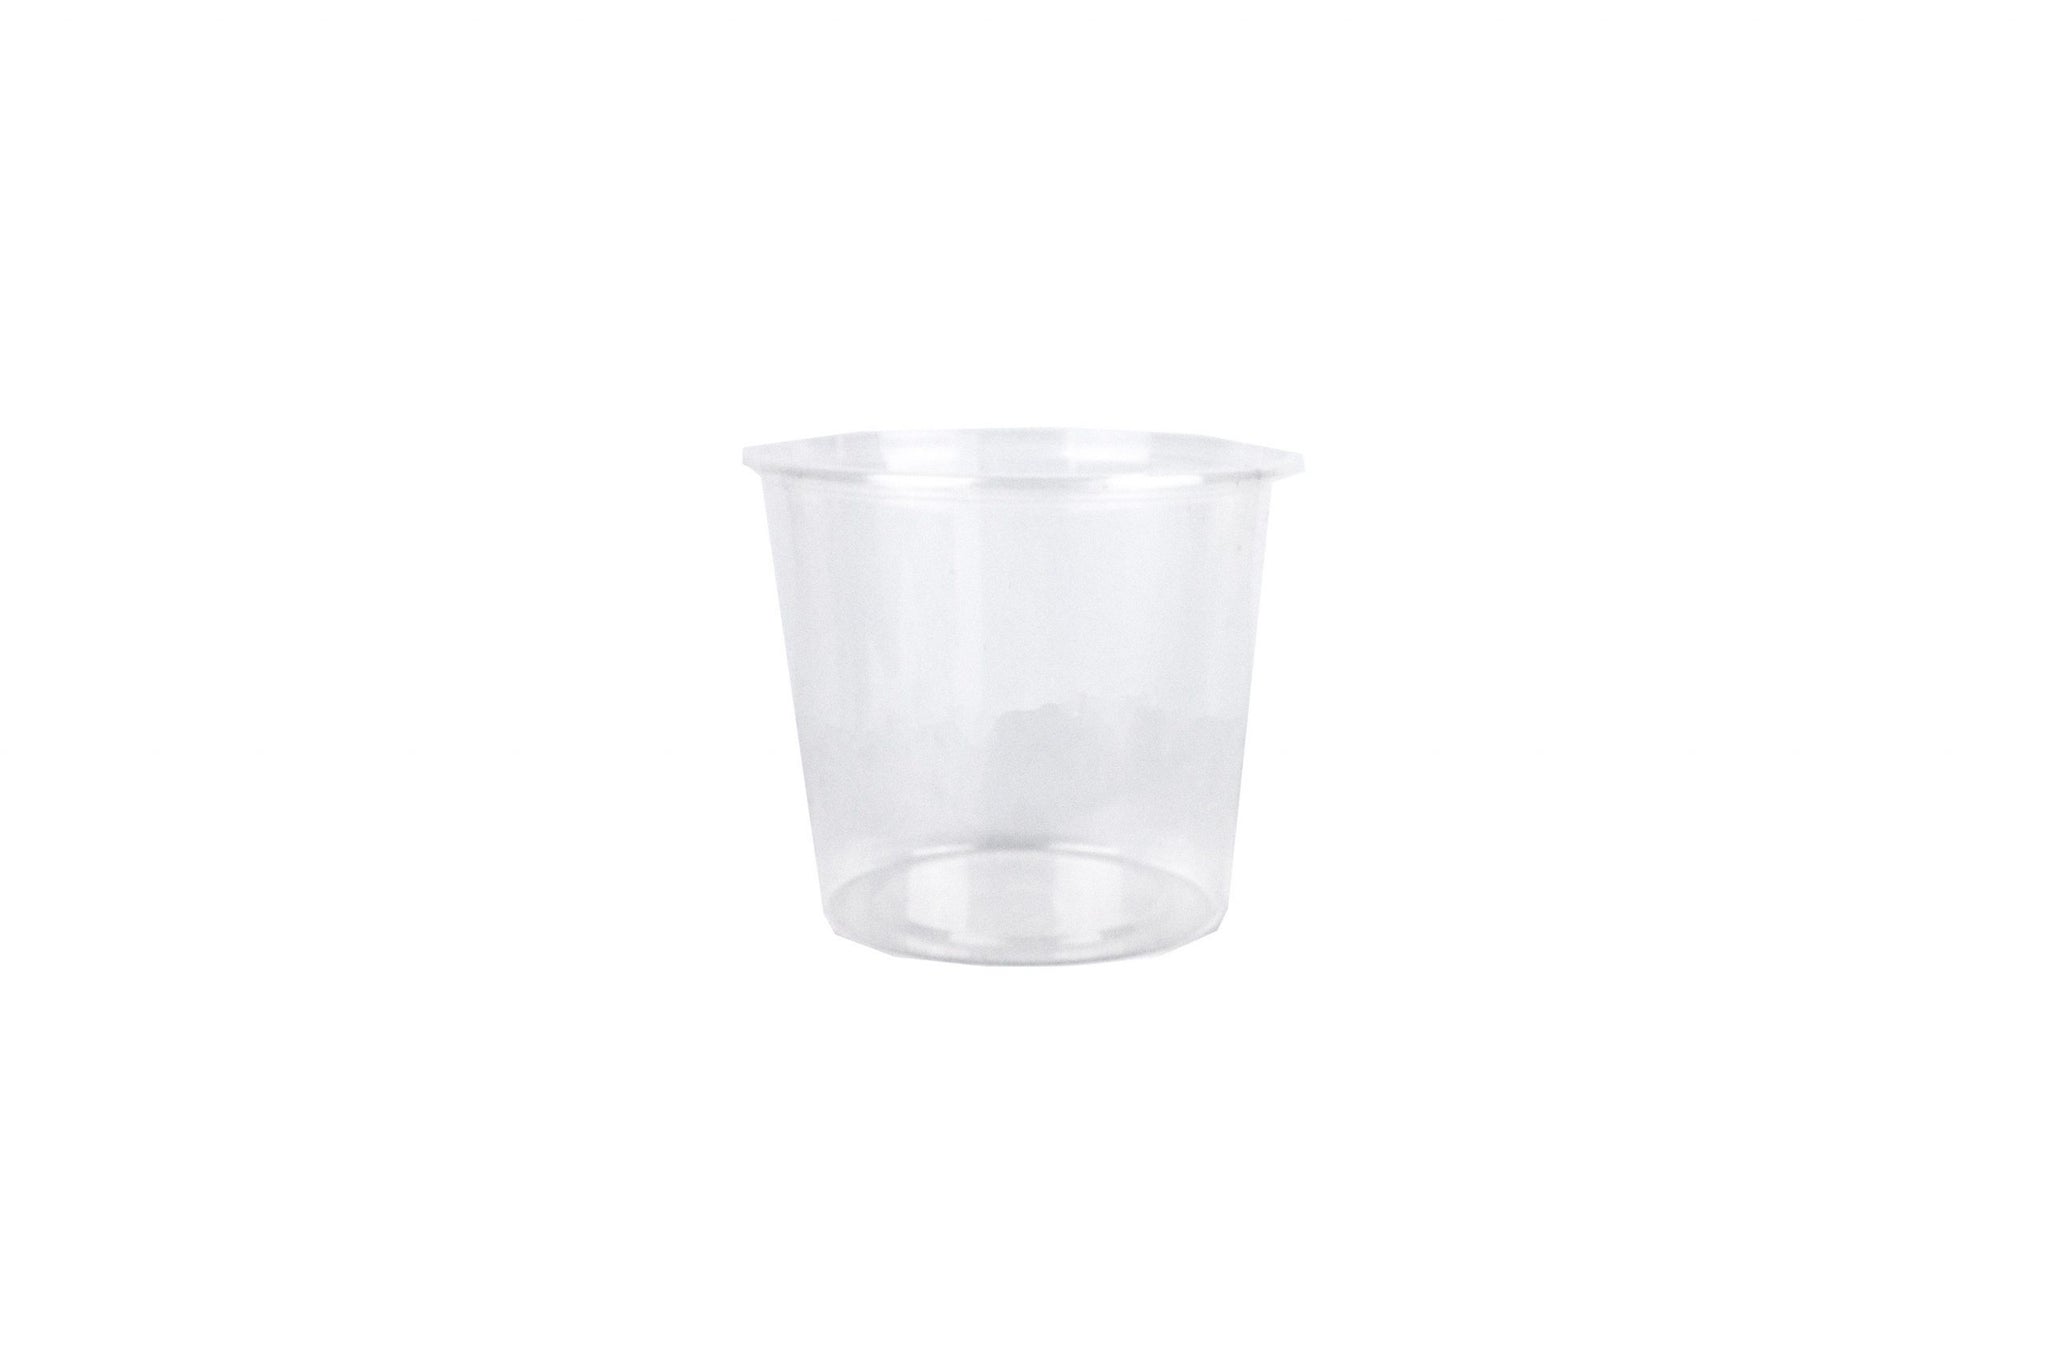 Reusable Container - 700mL Round Plastic Disposable Container 5 Pack